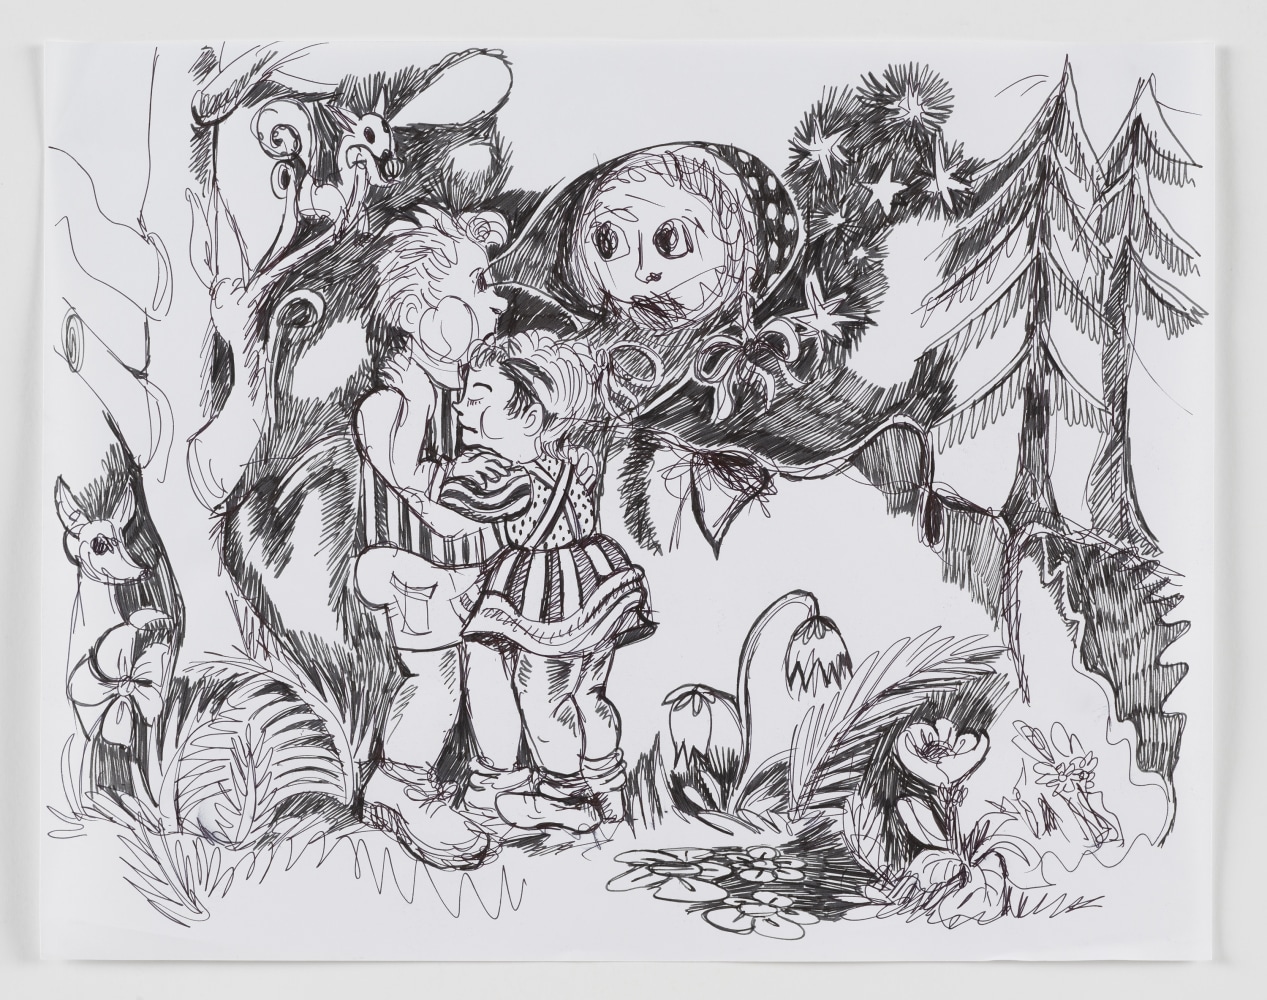 Christina Forrer
Alone (in the night in the forest), 2022
Pen on paper
14 x 17 inches
(35.6 x 43.2 cm)